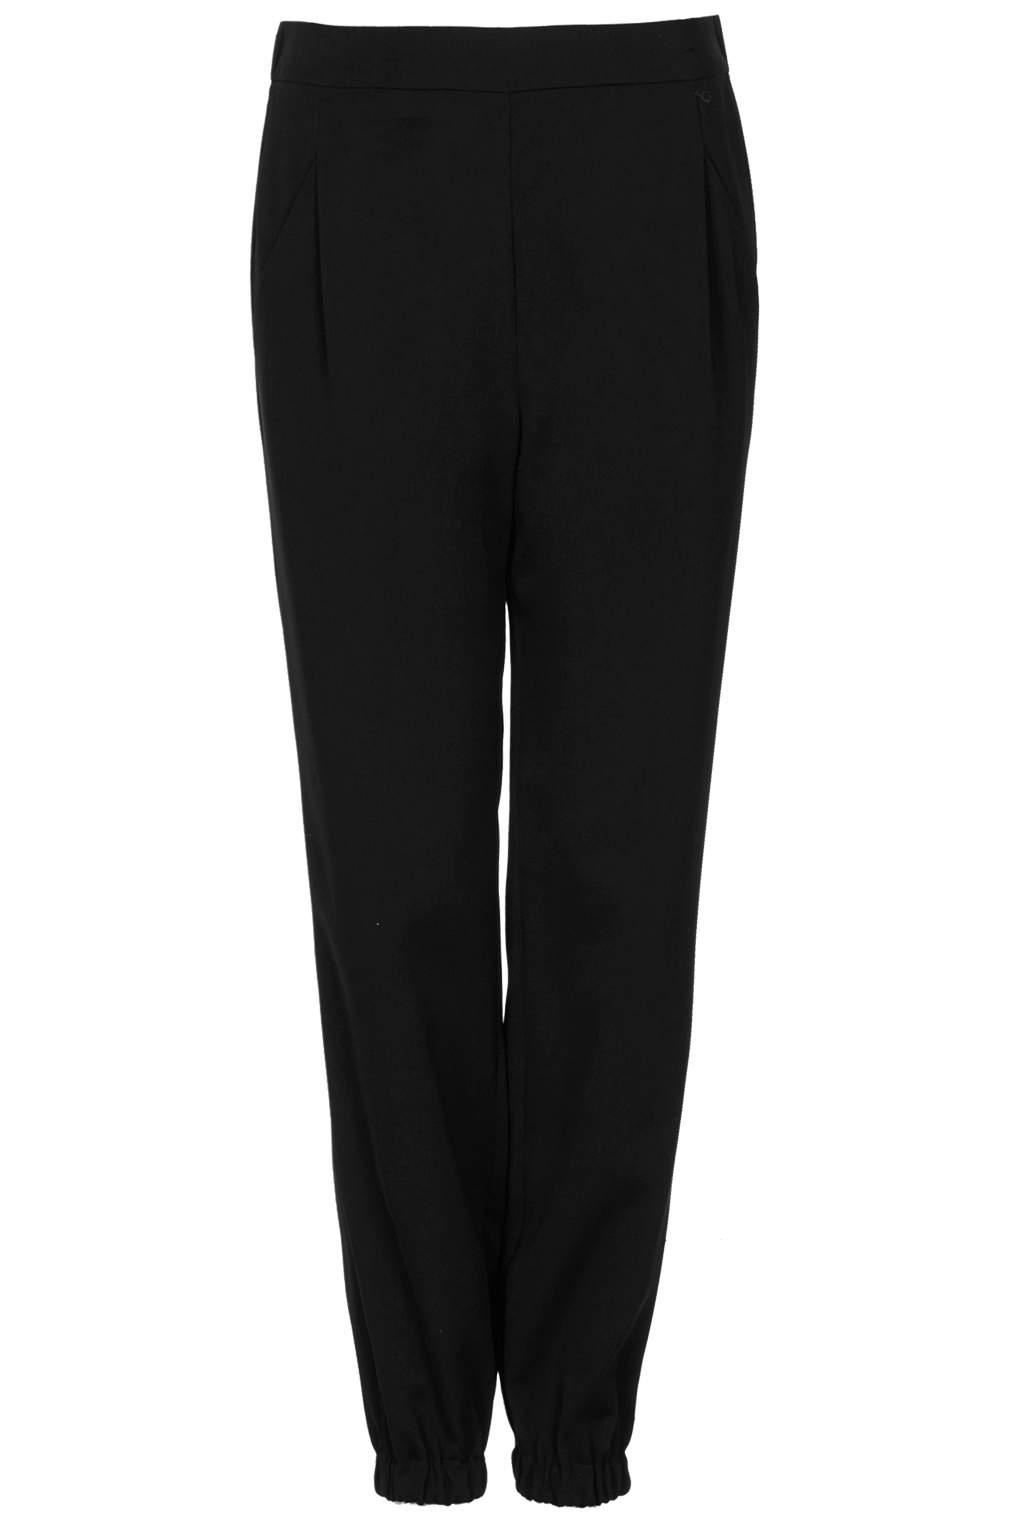 TOPSHOP Crepe Joggers in Black - Lyst